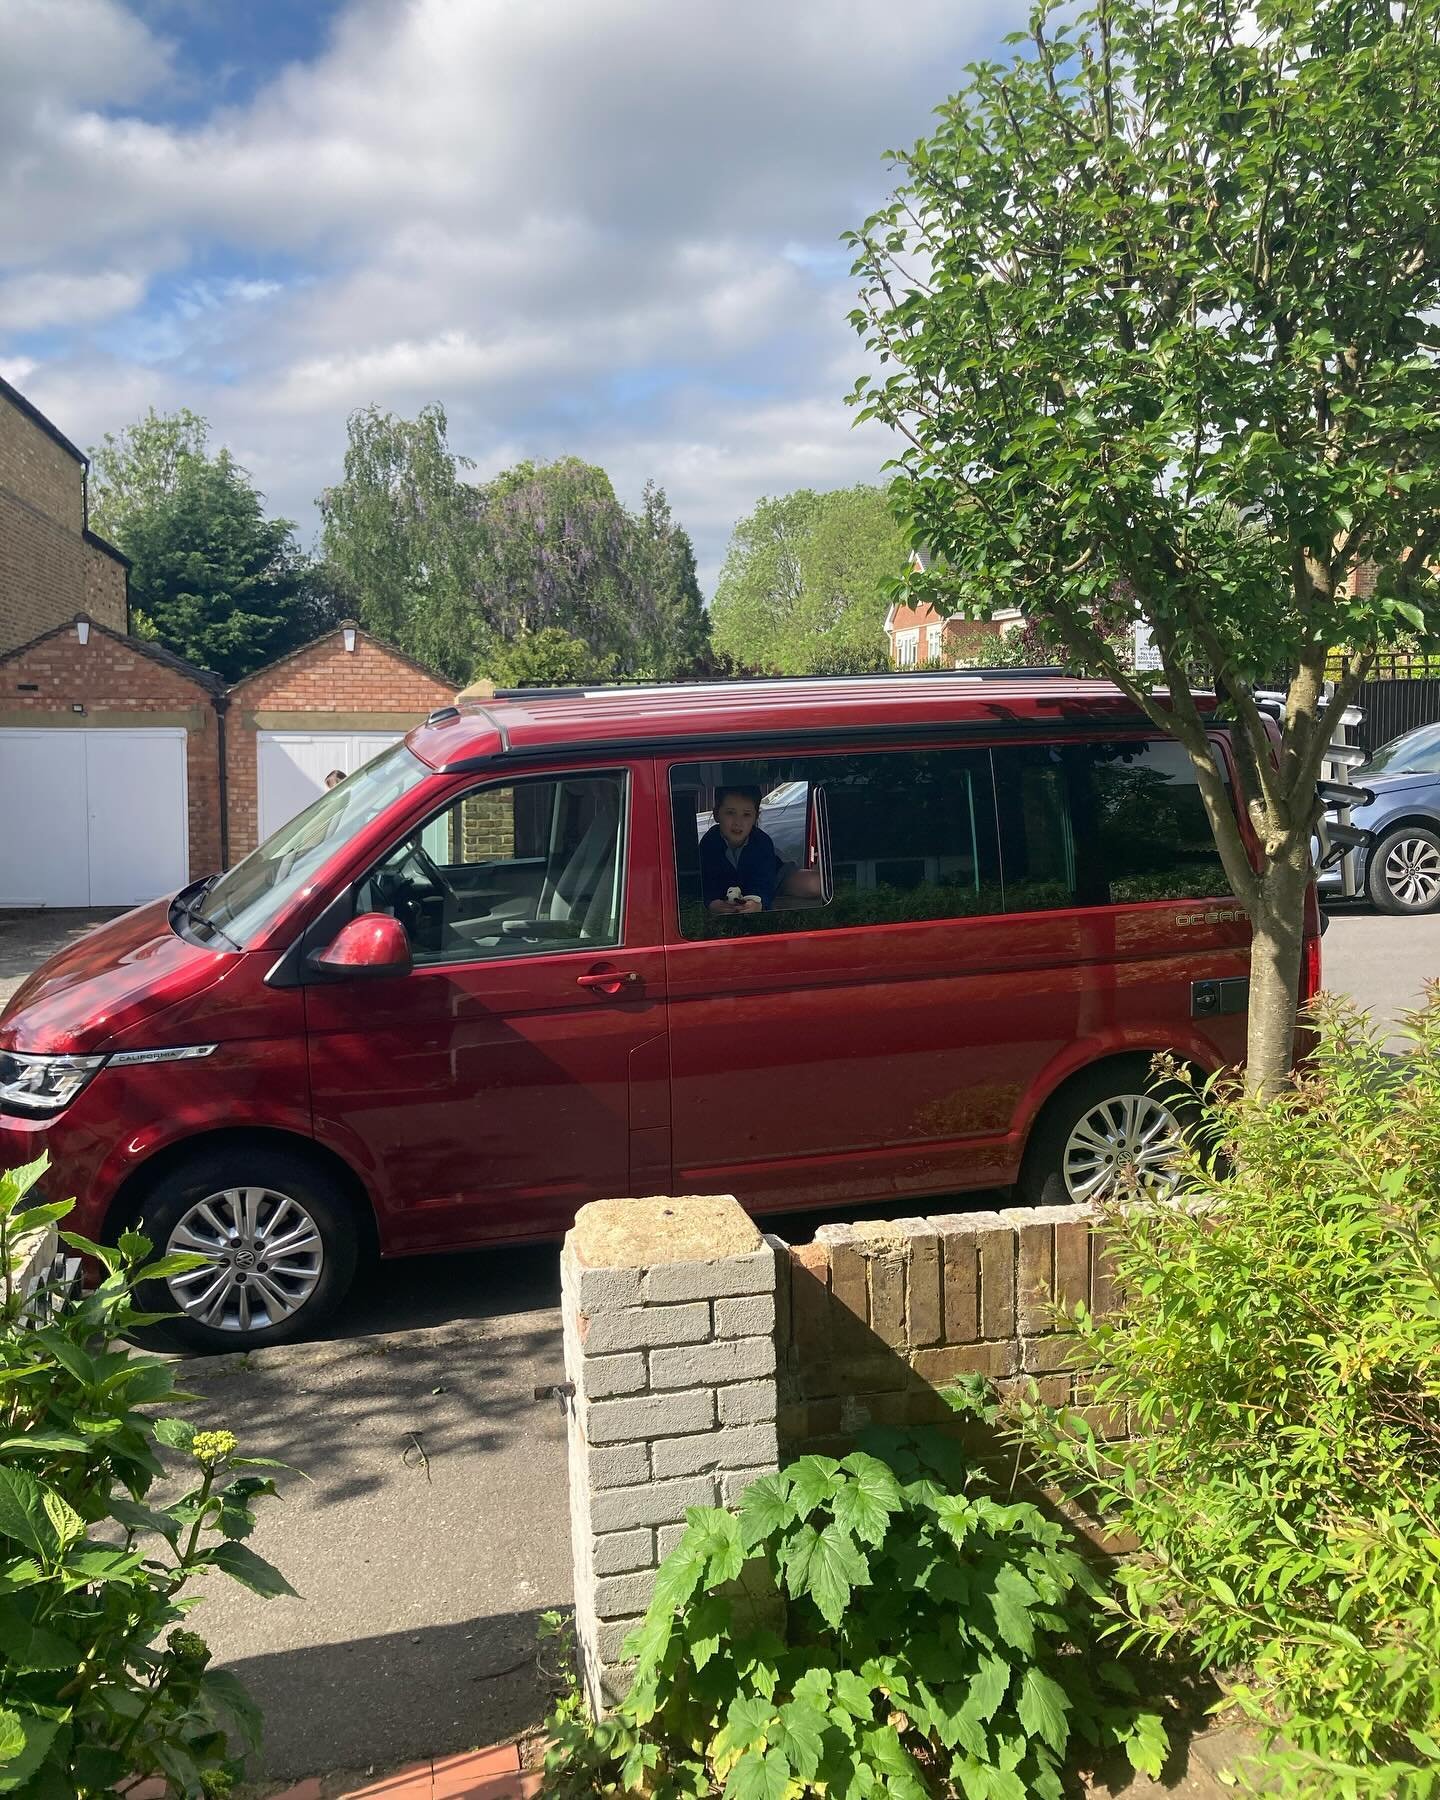 Meet Joy, the latest addition to the Gray family! She&rsquo;s named after the letters in her number plate and what we know she will bring us. It&rsquo;s been a dream of mine to own a campervan for some time, featuring on many of my vision boards and 